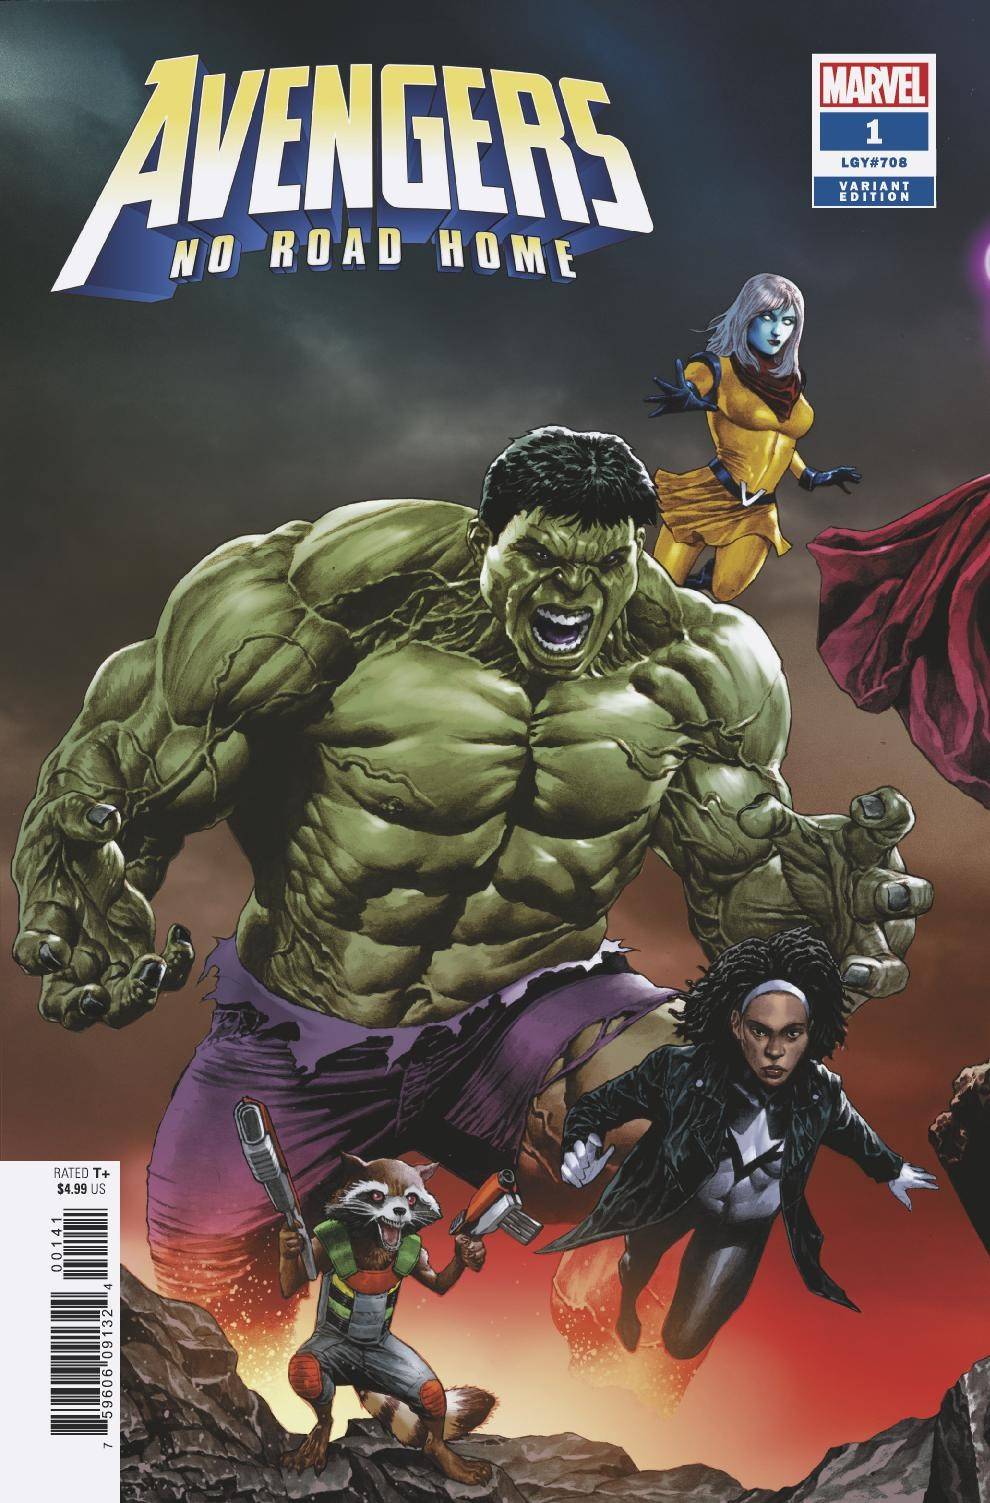 AVENGERS NO ROAD HOME #1 (OF 10) SUAYAN CONNECTING VARIANT 02/13/19